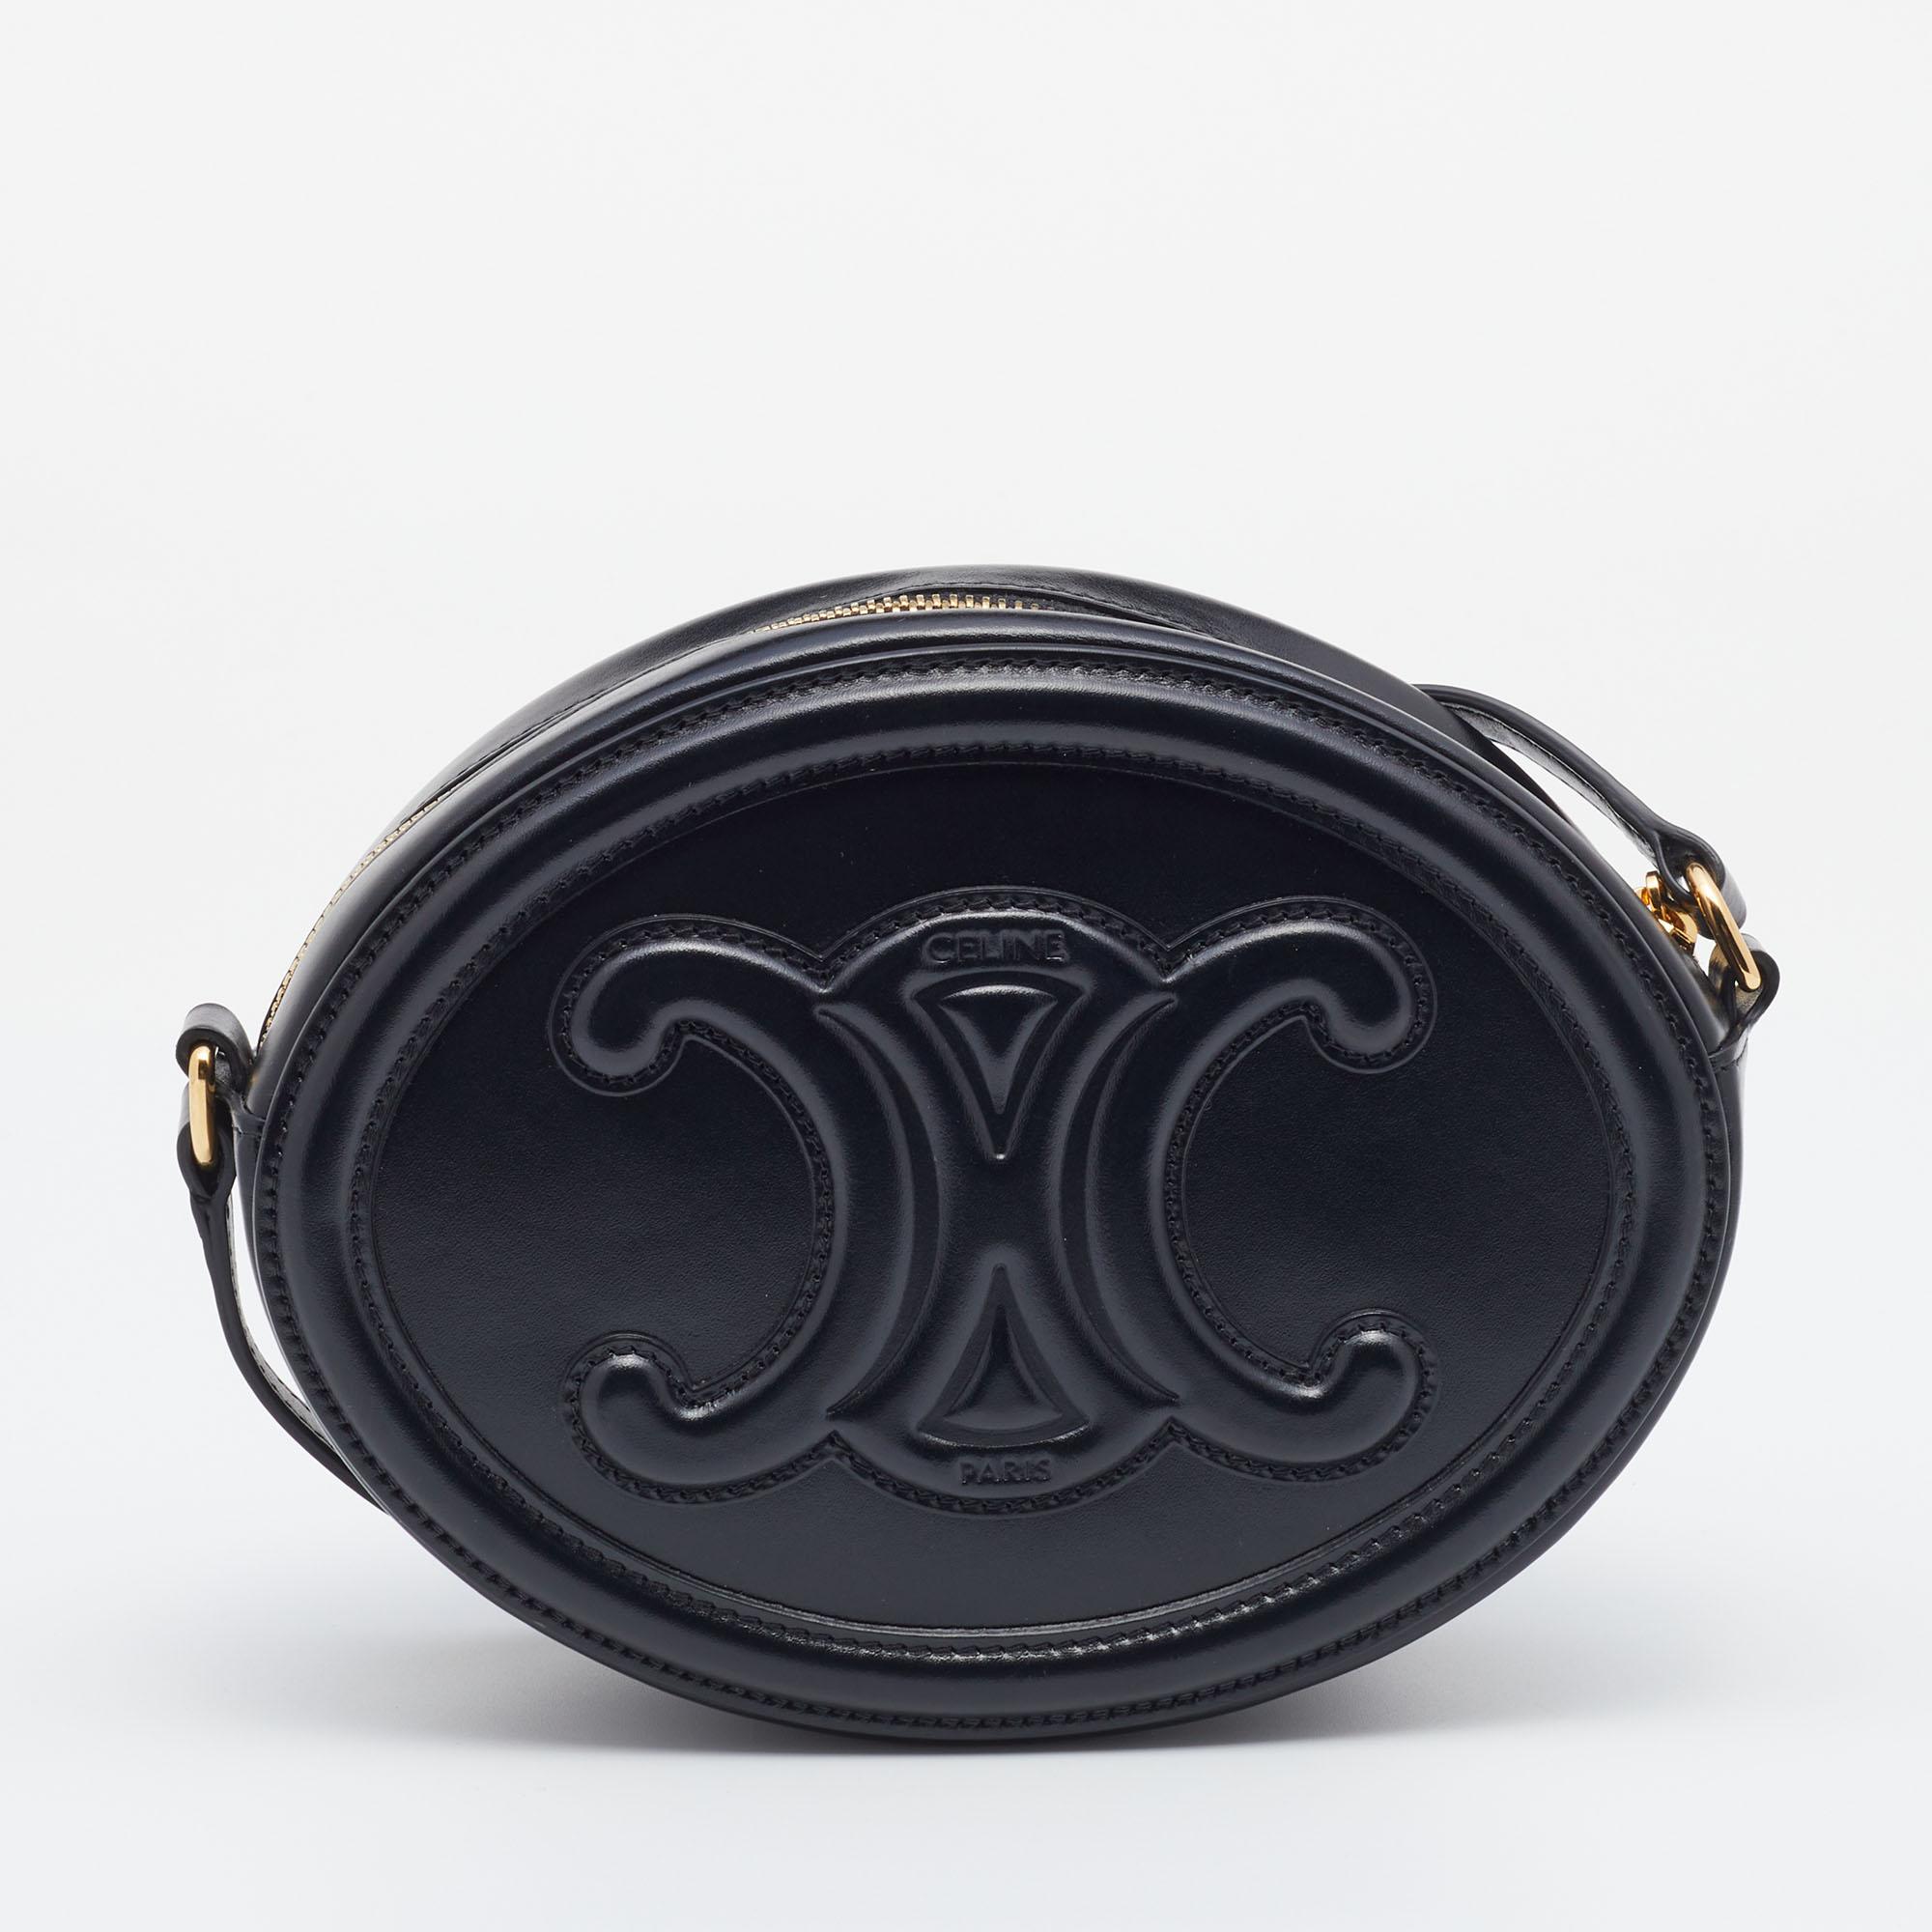 This designer bag from Celine is sewn into a seamless oval silhouette. This crossbody bag, personifying elegance and subtle charm, is held by a comfortable strap. Brimming with artistry and quality craftsmanship, the bag has an exterior feature the